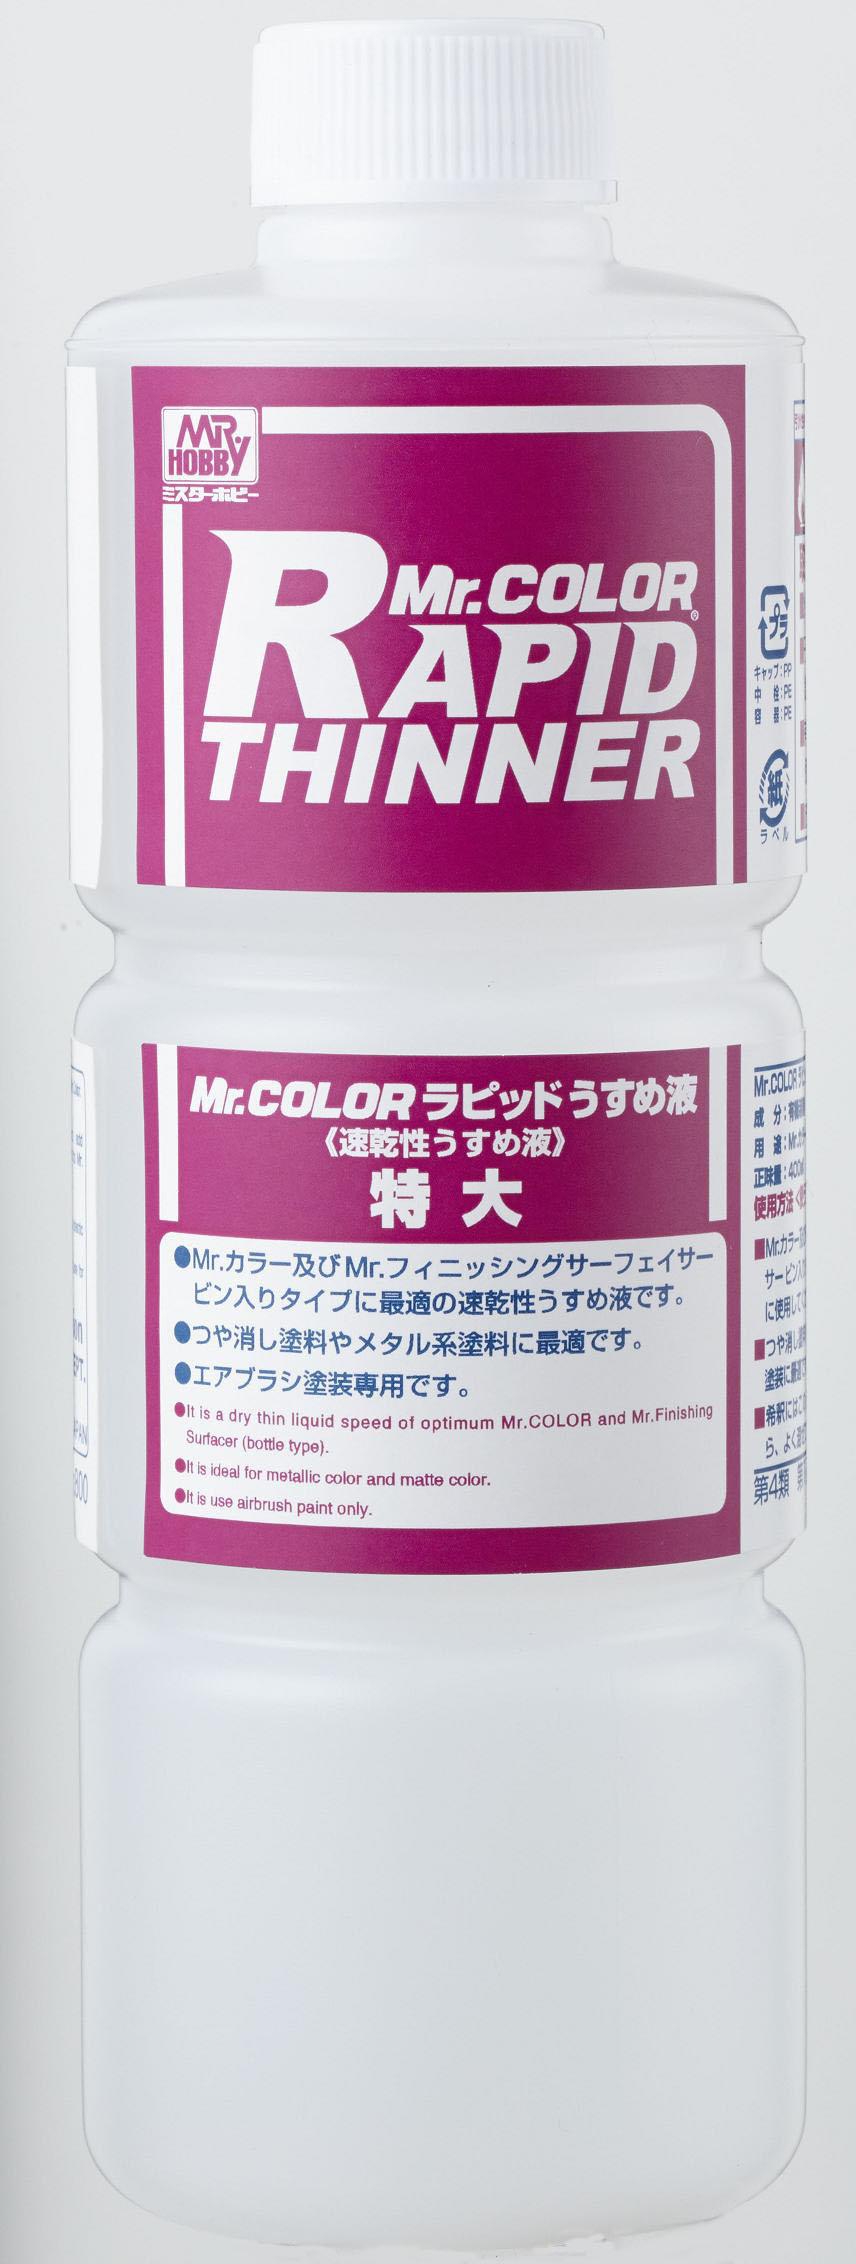 MR. COLOR GX, Mr.COLOR, PAINT / THINNER / SPRAY